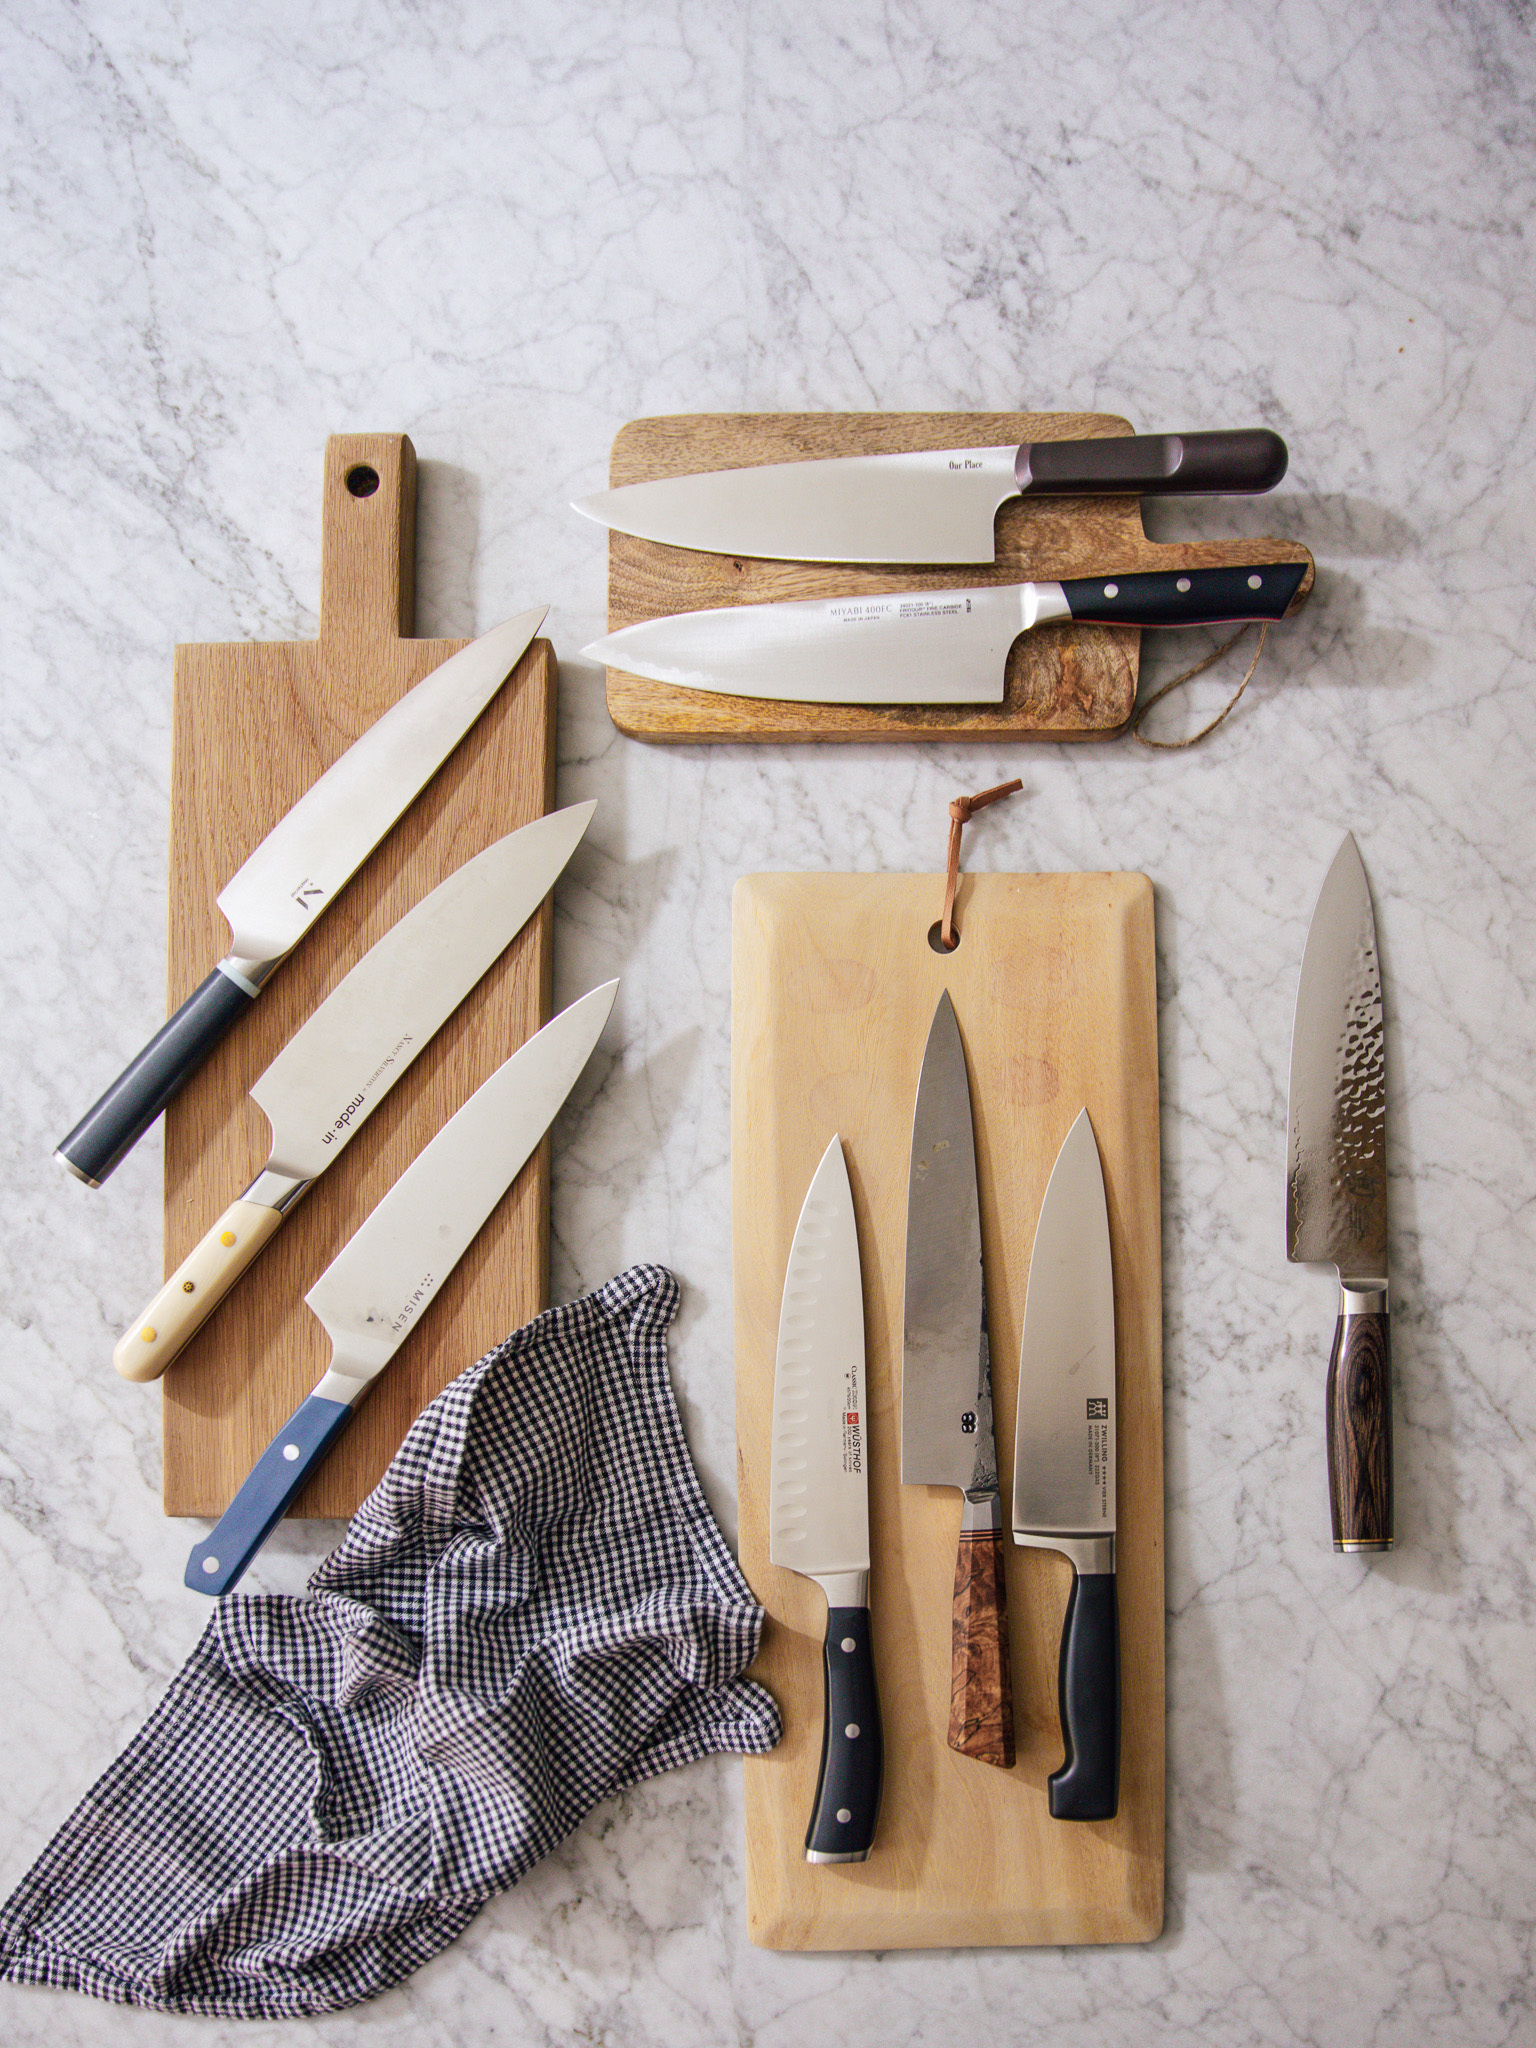 The 9 Best Chef's Knives According to Chris - Chris Loves Julia